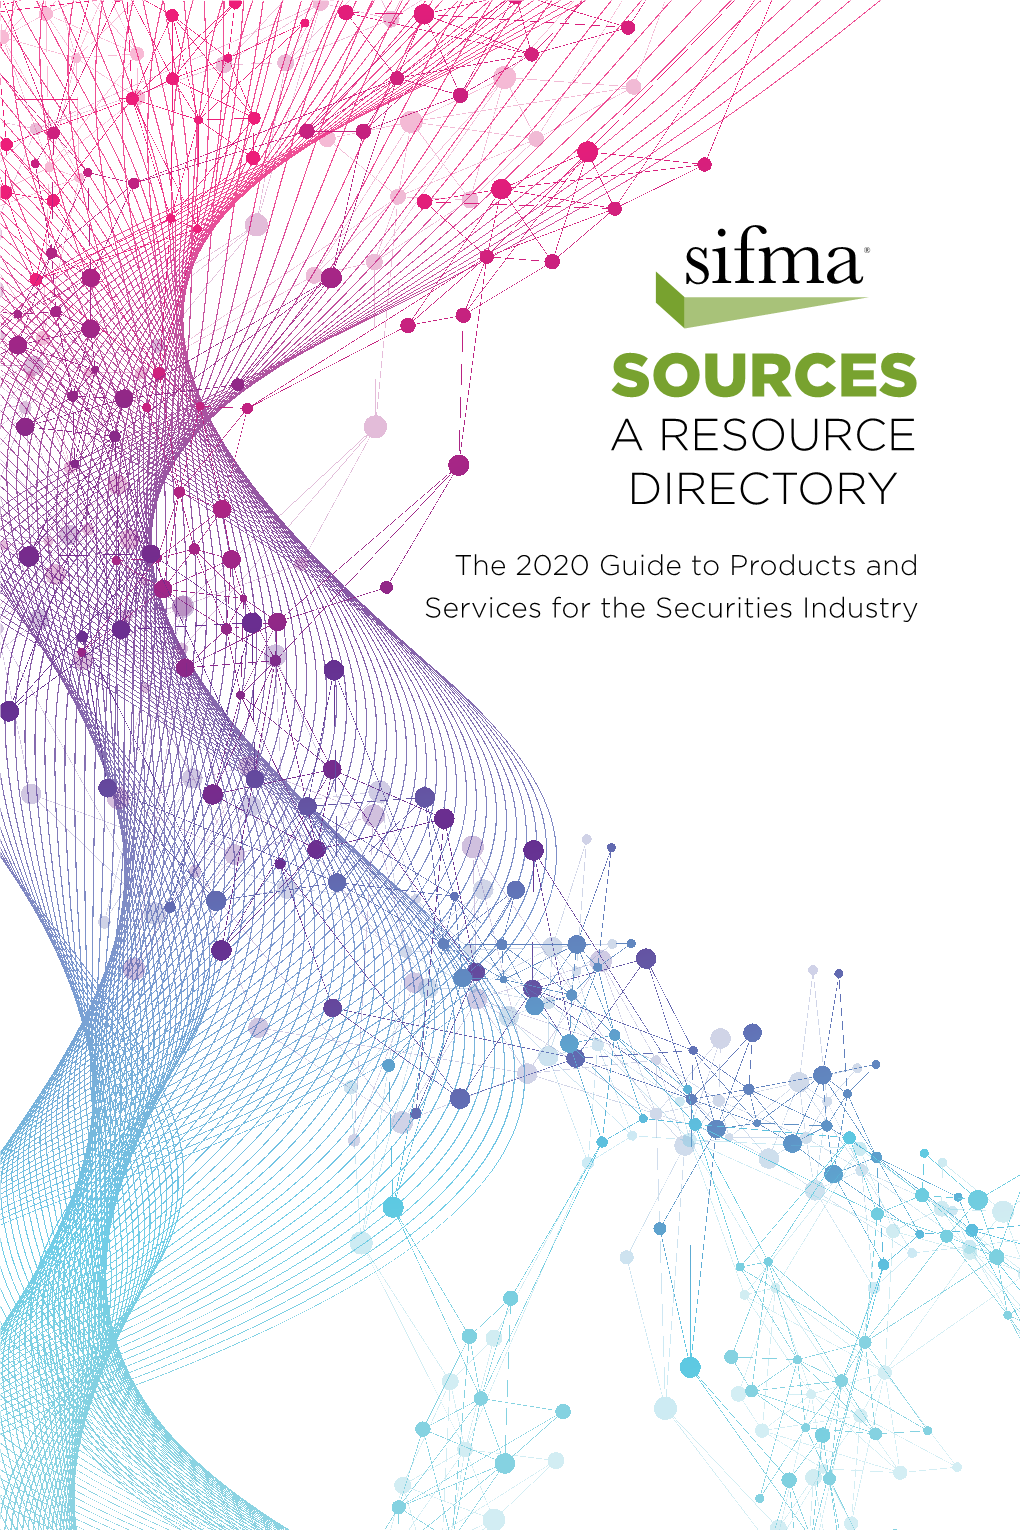 SIFMA Sources: a Resource Directory